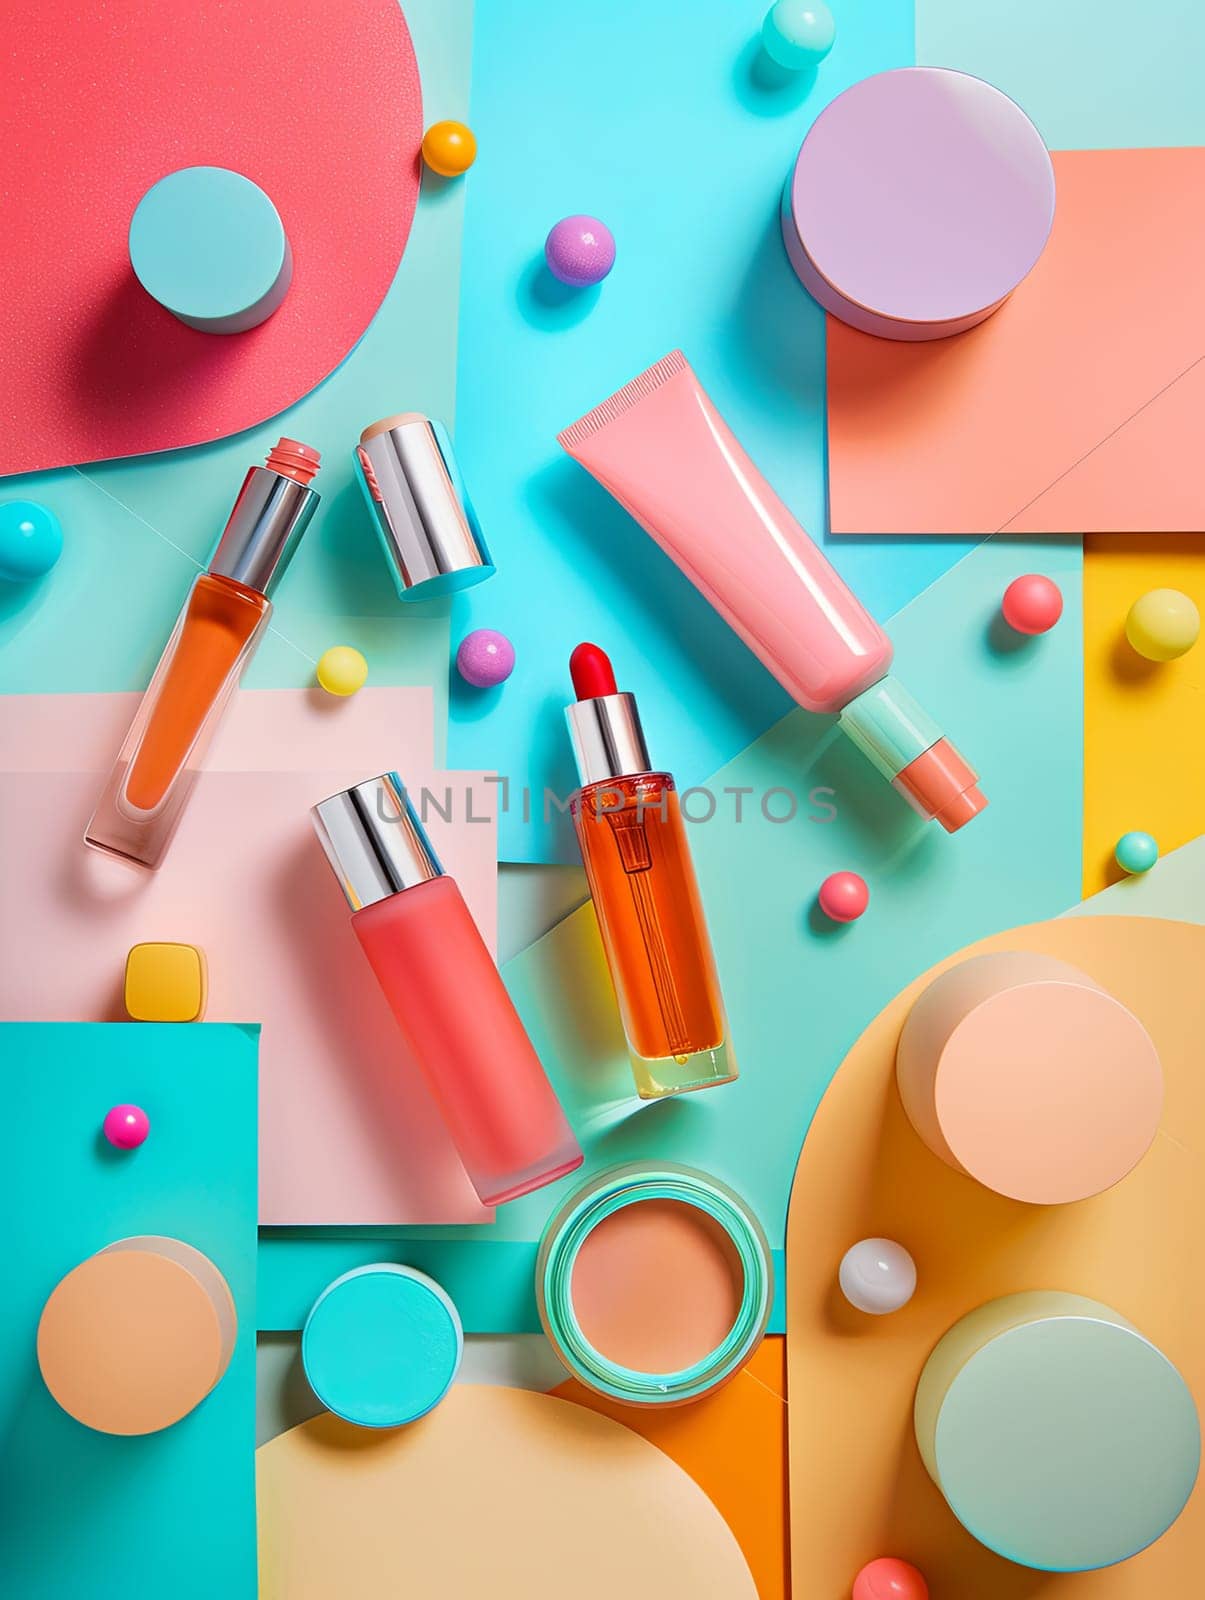 Various colored lipsticks are arranged on a colorful surface, creating a vibrant and eye-catching display of cosmetic products.